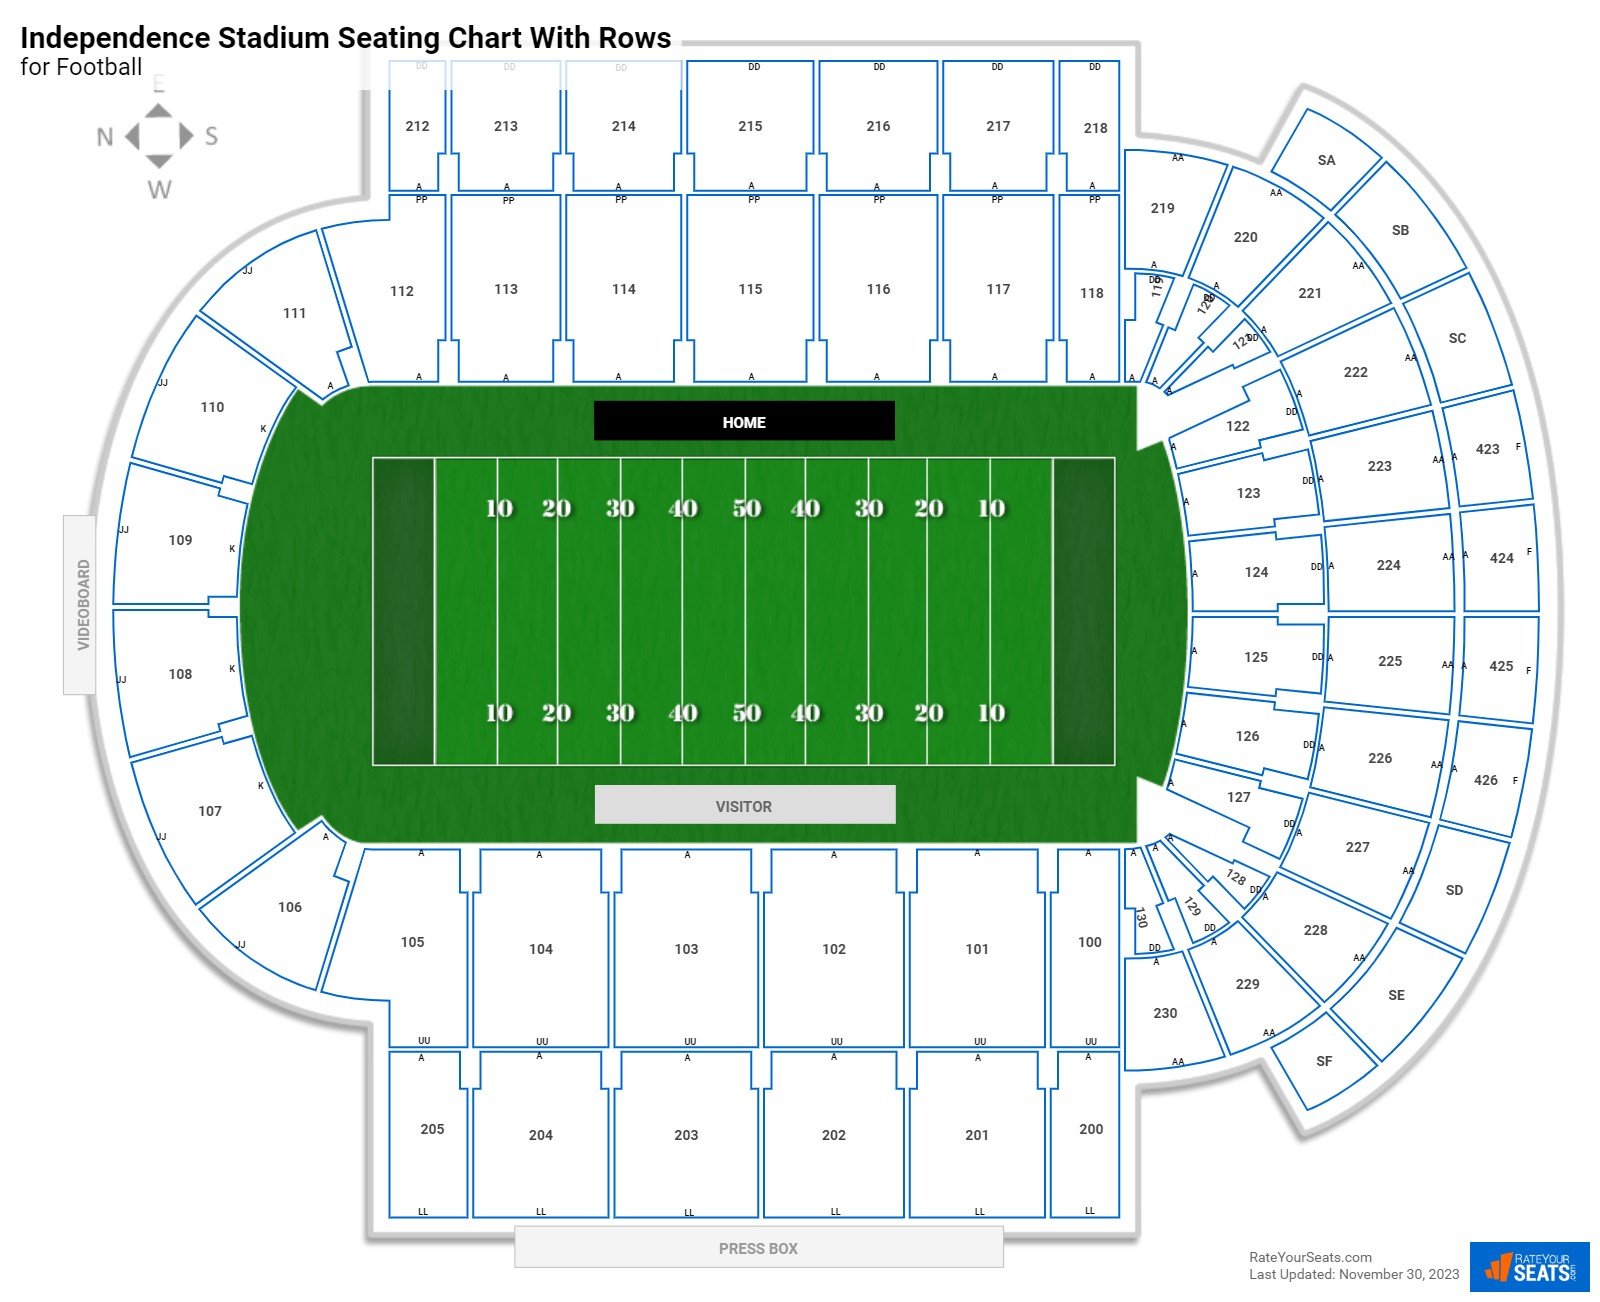 Independence Stadium seating chart with row numbers